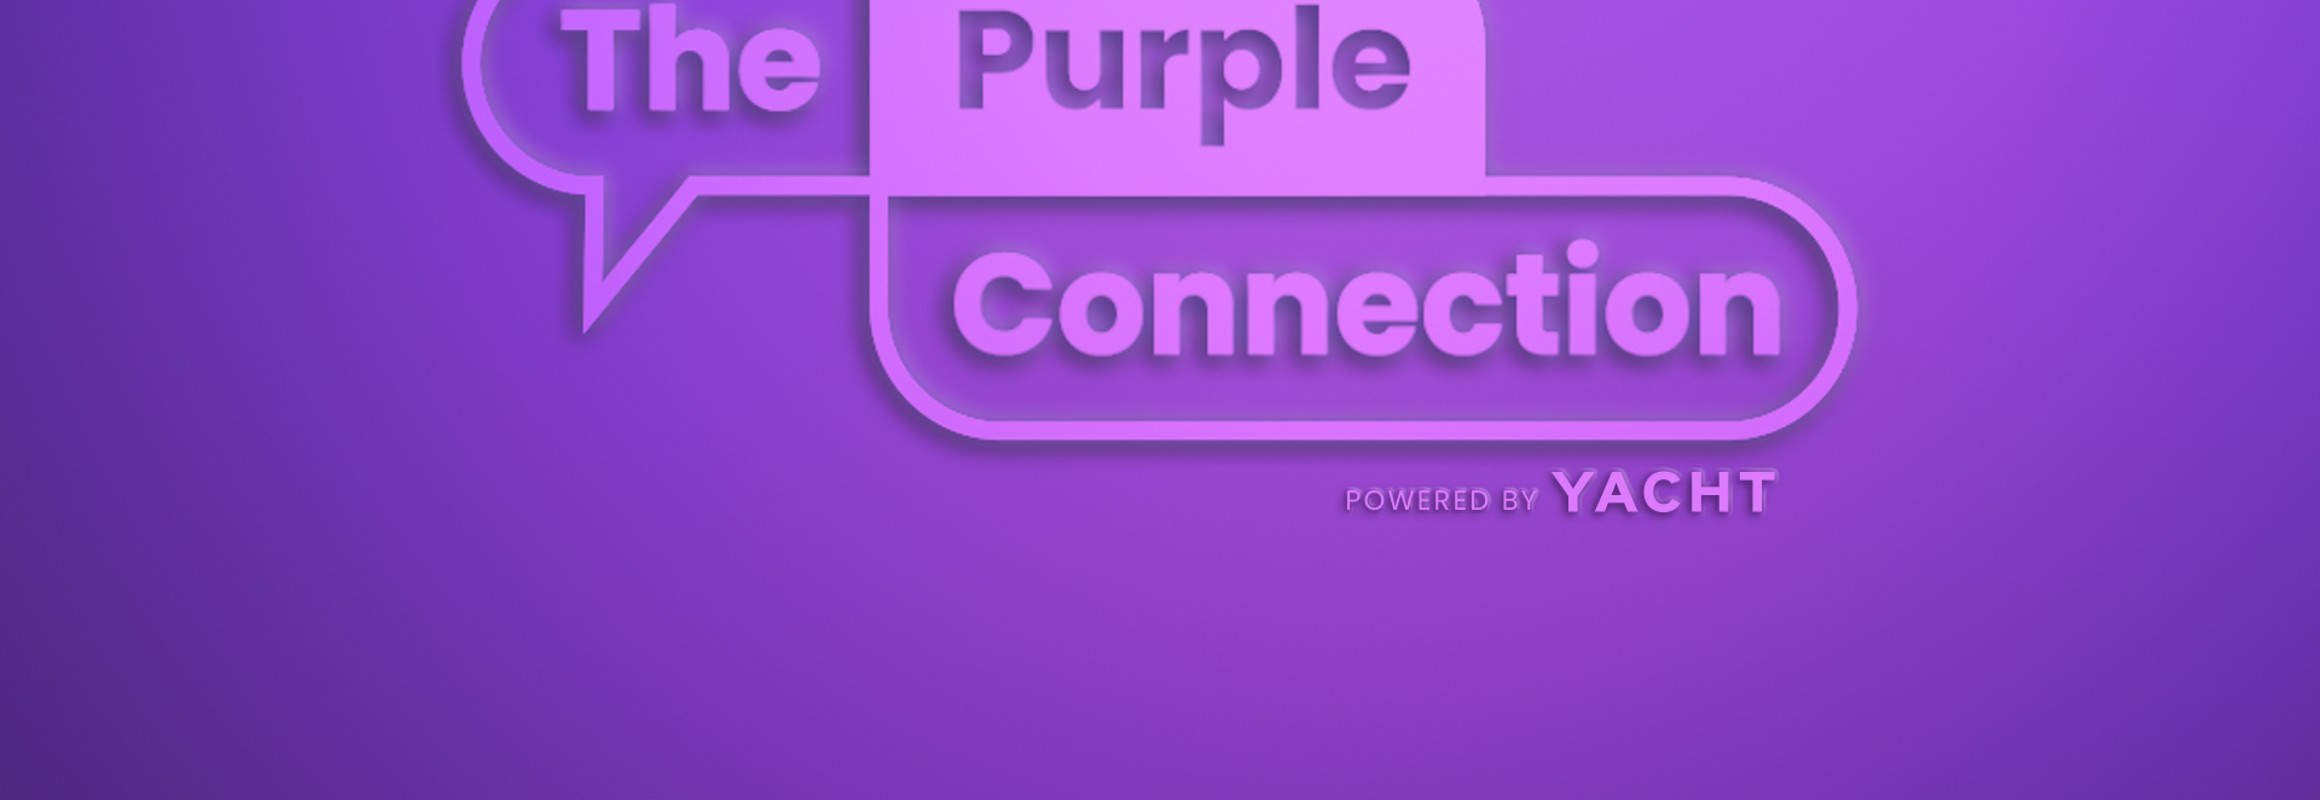 The Purple Connection: pak een slimme voorsprong in je carrière Cover